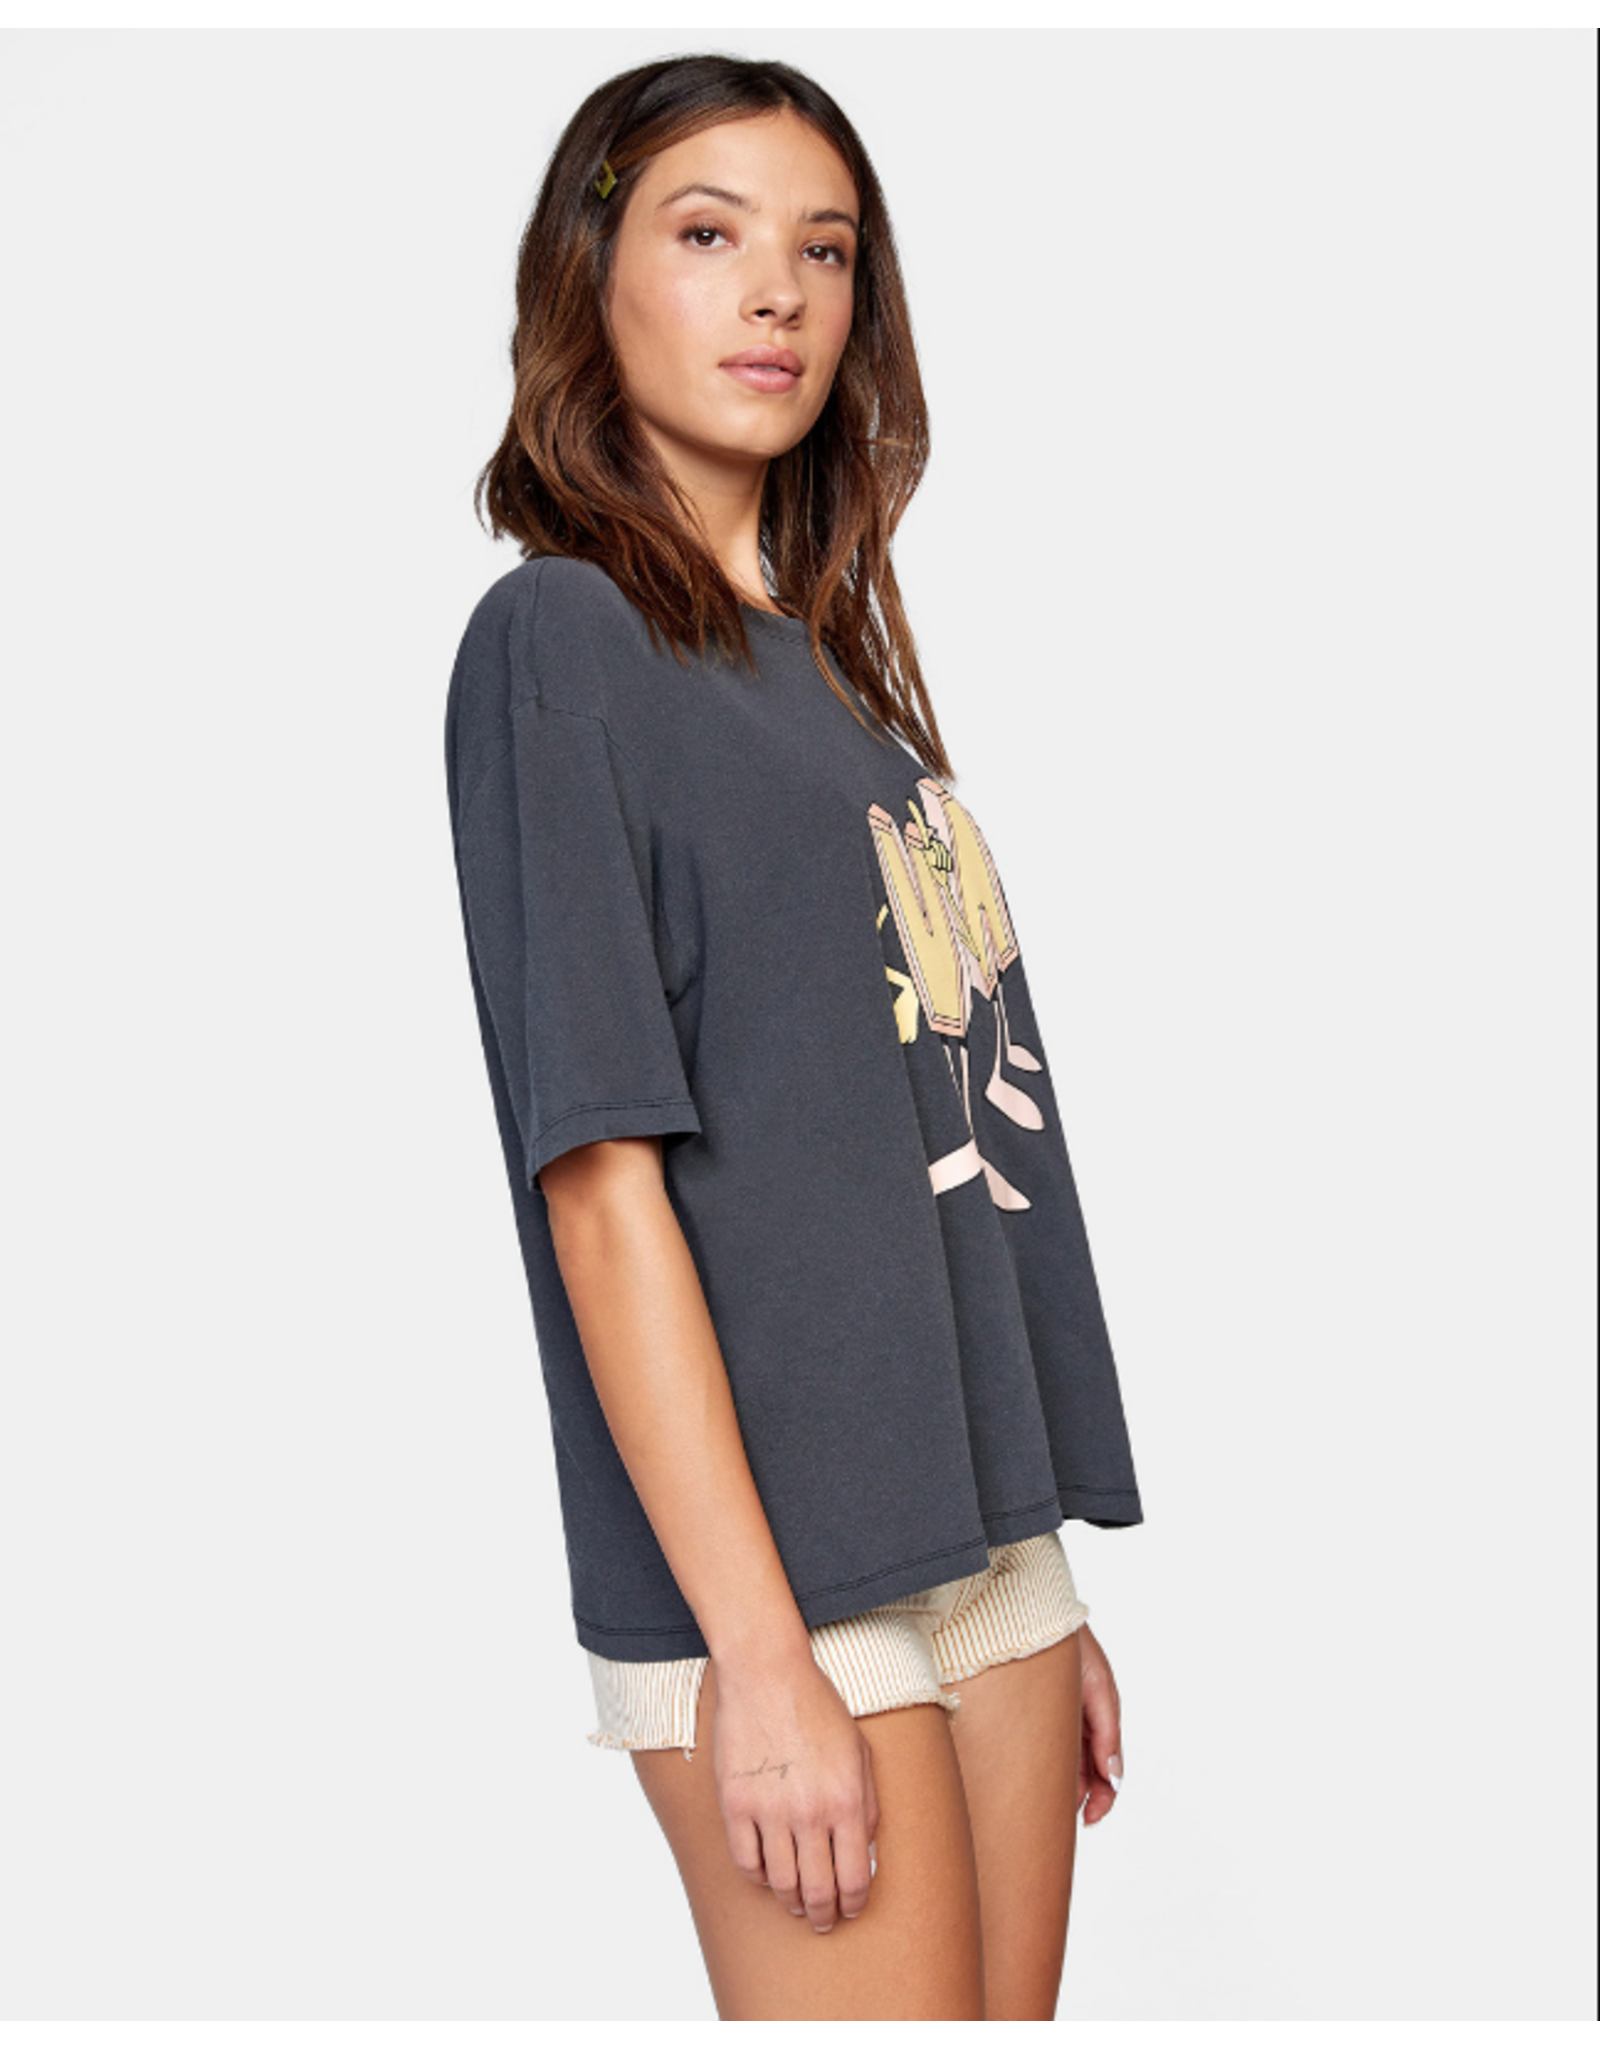 RVCA Girls DMOTE | MASCOT ANYDAY TEE